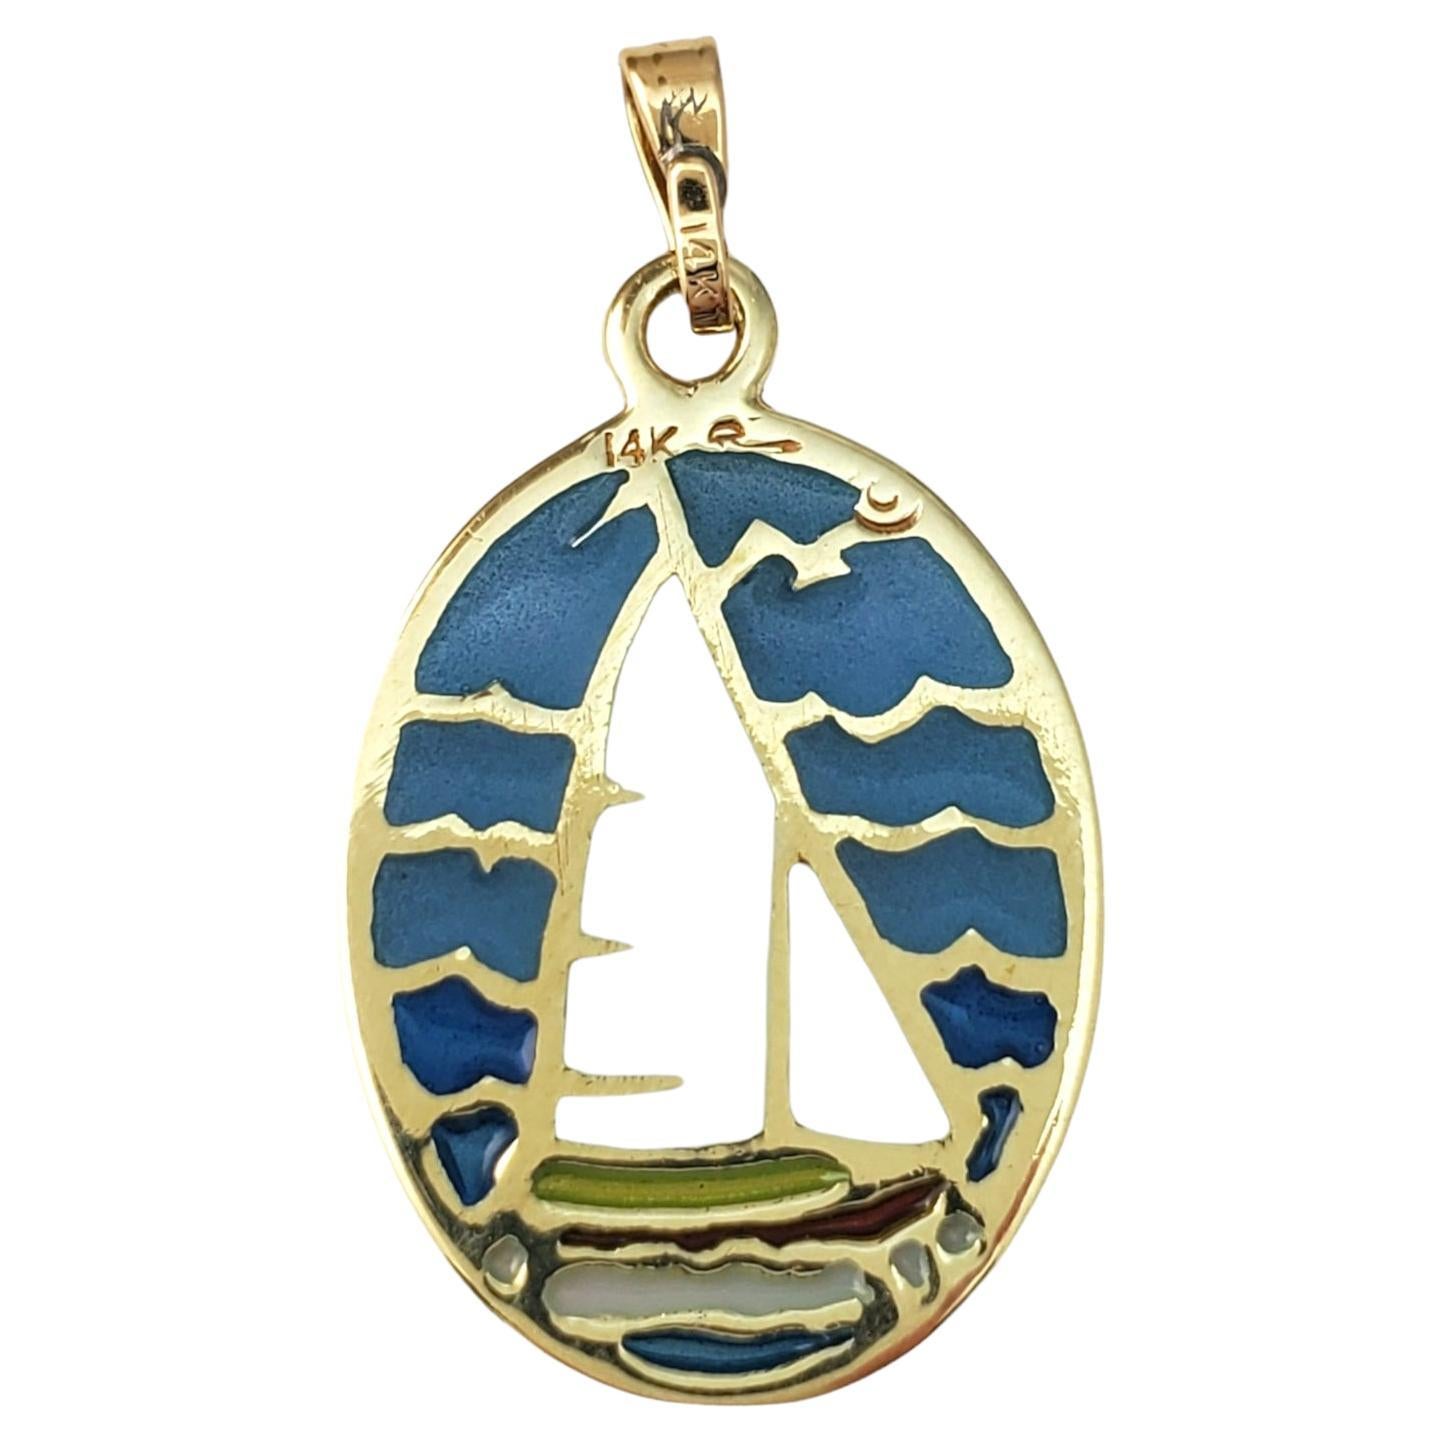 Vintage 14K Yellow Gold Sailboat Pendant-

This gorgeous pendant features a display of a sailboat on the open ocean. 

Size:  22.6 mm  x  14.8 mm X 1.0 mm 

Weight:  1.1 dwt./  1.8 gr.

Stamped:  14K

Will come packaged in a gift box or pouch (when